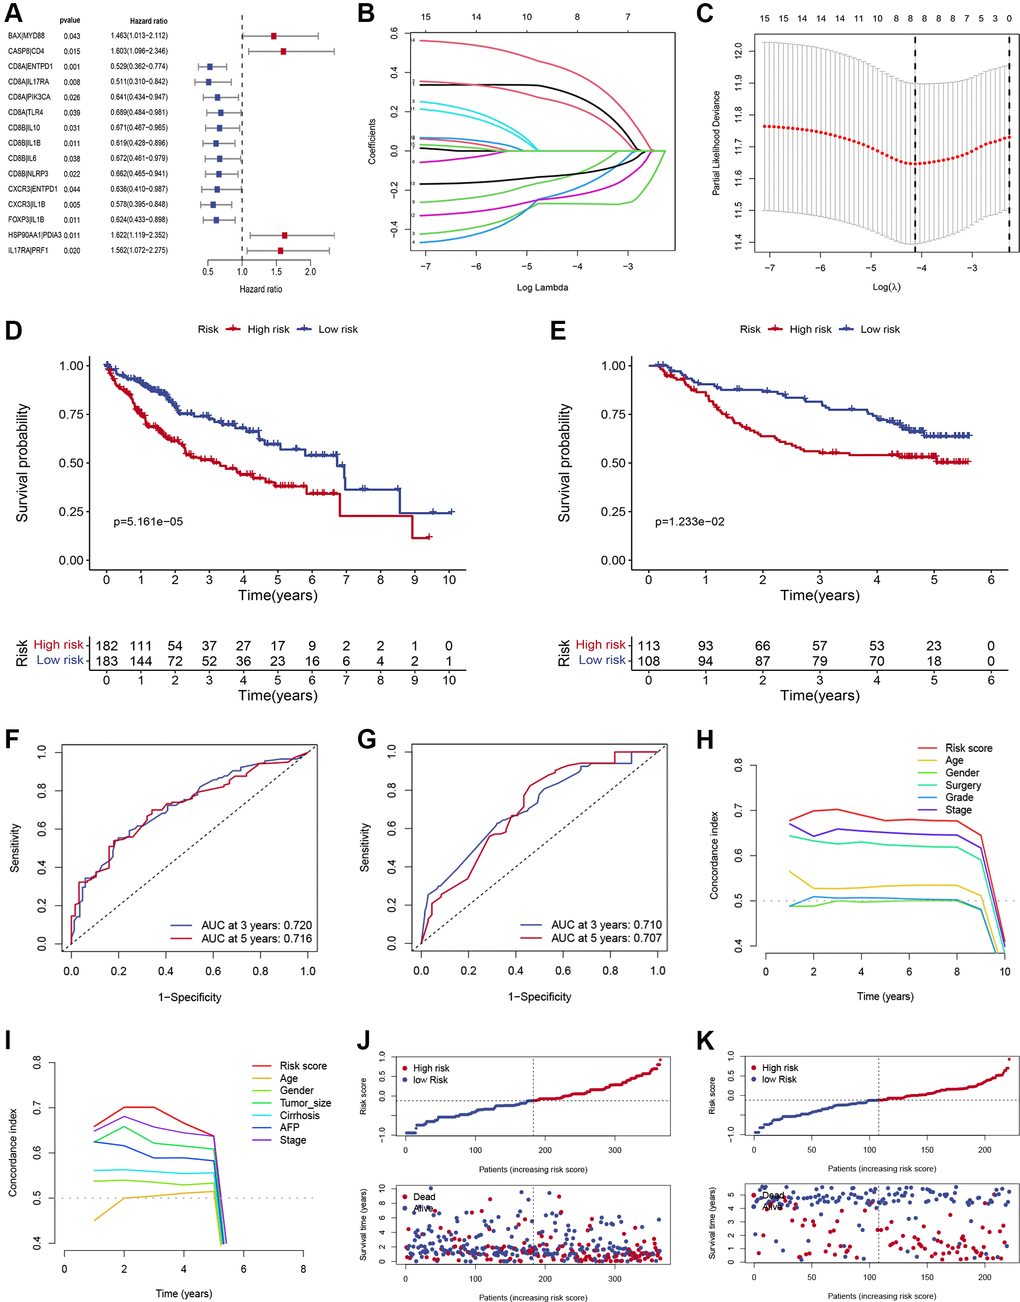 Construction and verification of ICD-related prognostic gene signature. (A) Forest plots showing the results of the Cox univariate regression of 15 ICD-related prognostic gene pairs. (B) The LASSO coefficient profile of 8 ICD-related prognostic gene pairs. (C) Selection of optimal LASSO model parameters for HCC patients (λ). (D, E) Kaplan-Meier survival curves of patients in low- and high-risk groups in training (D) and validation (E) sets. (F, G) The AUC values of the signature in the training (F) and validation sets (G). (H, I) C-index of the risk score and other clinical traits in the training (H) and validation sets (I). (J, K) Risk score and OS distributions were assessed in the training (J) and validation sets (K).